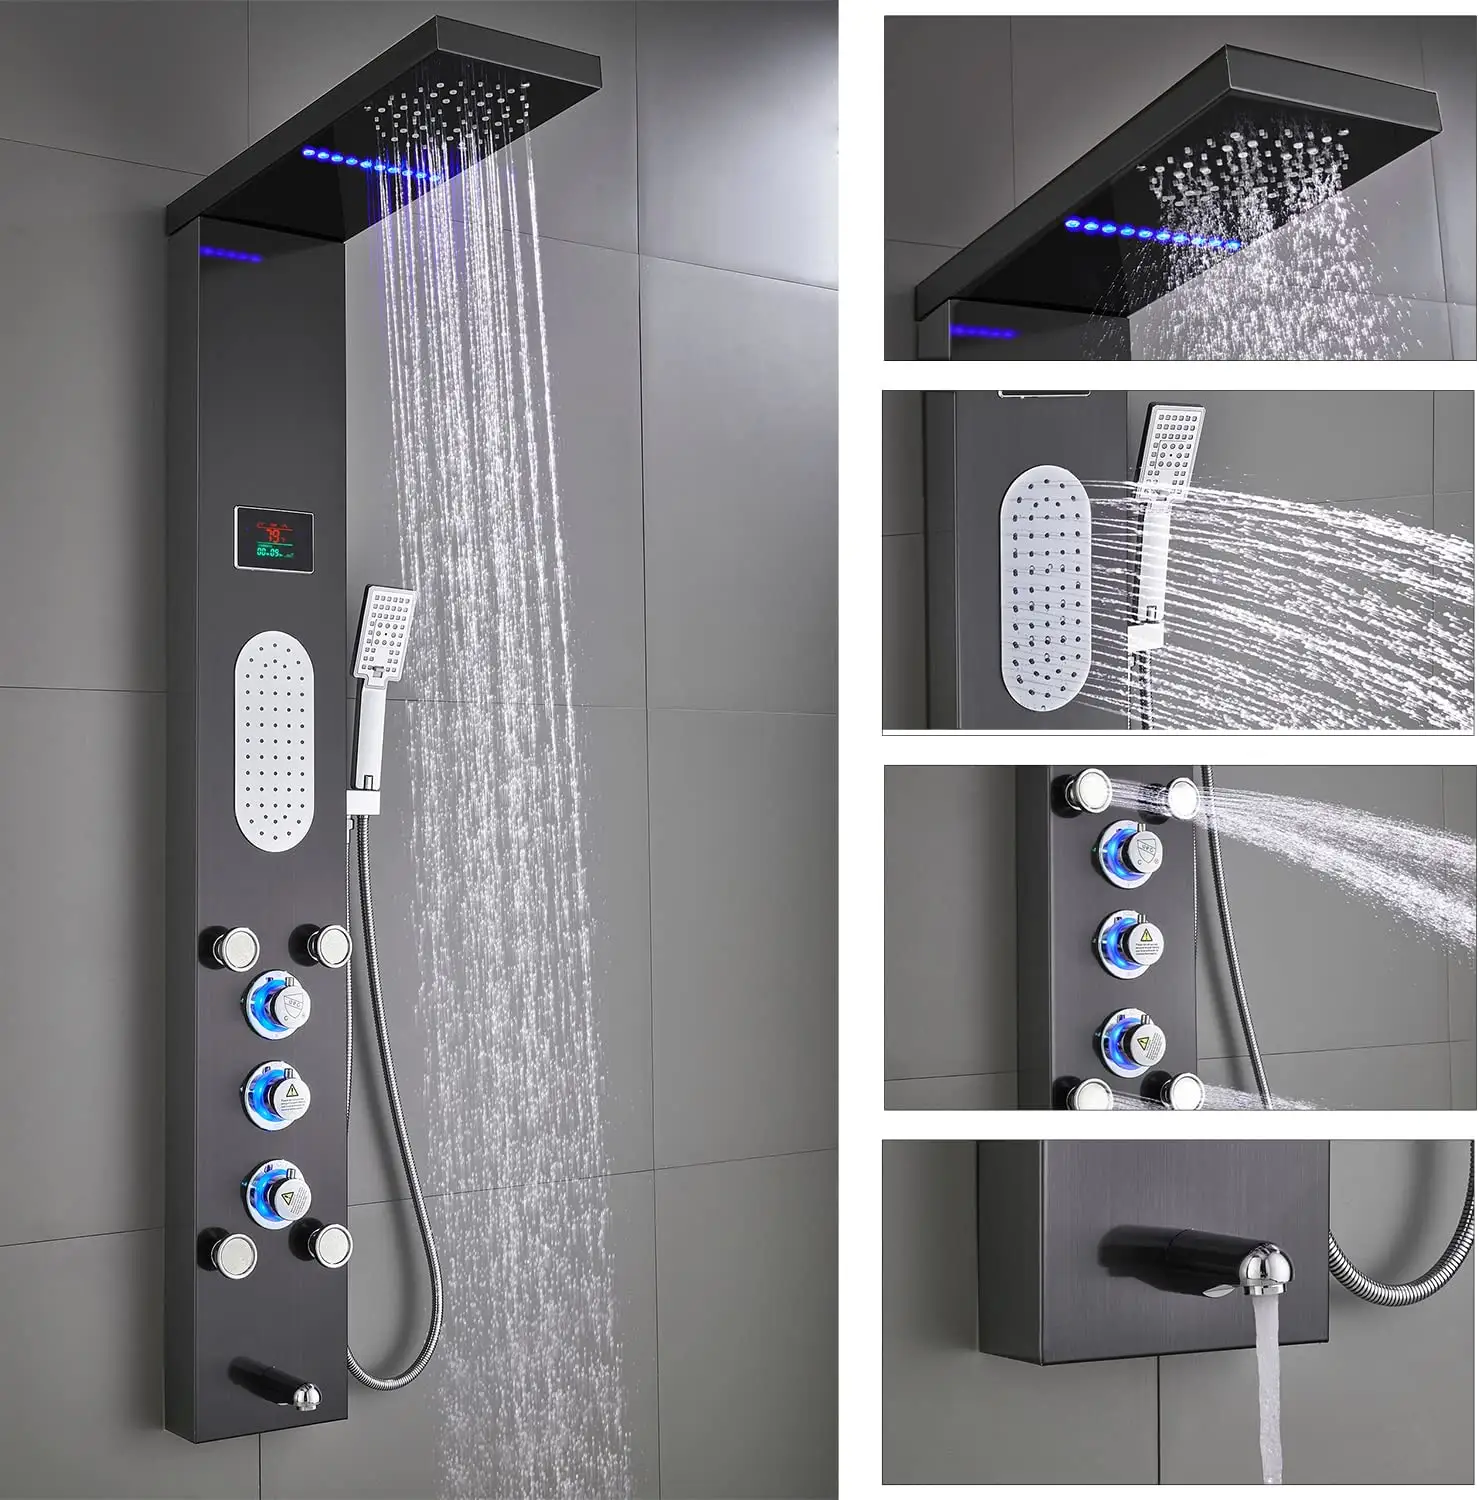 LED Shower Panel Tower System Rainfall and Mist Head Rain Massage Stainless Steel Shower Fixtures with Adjustable Body Jet